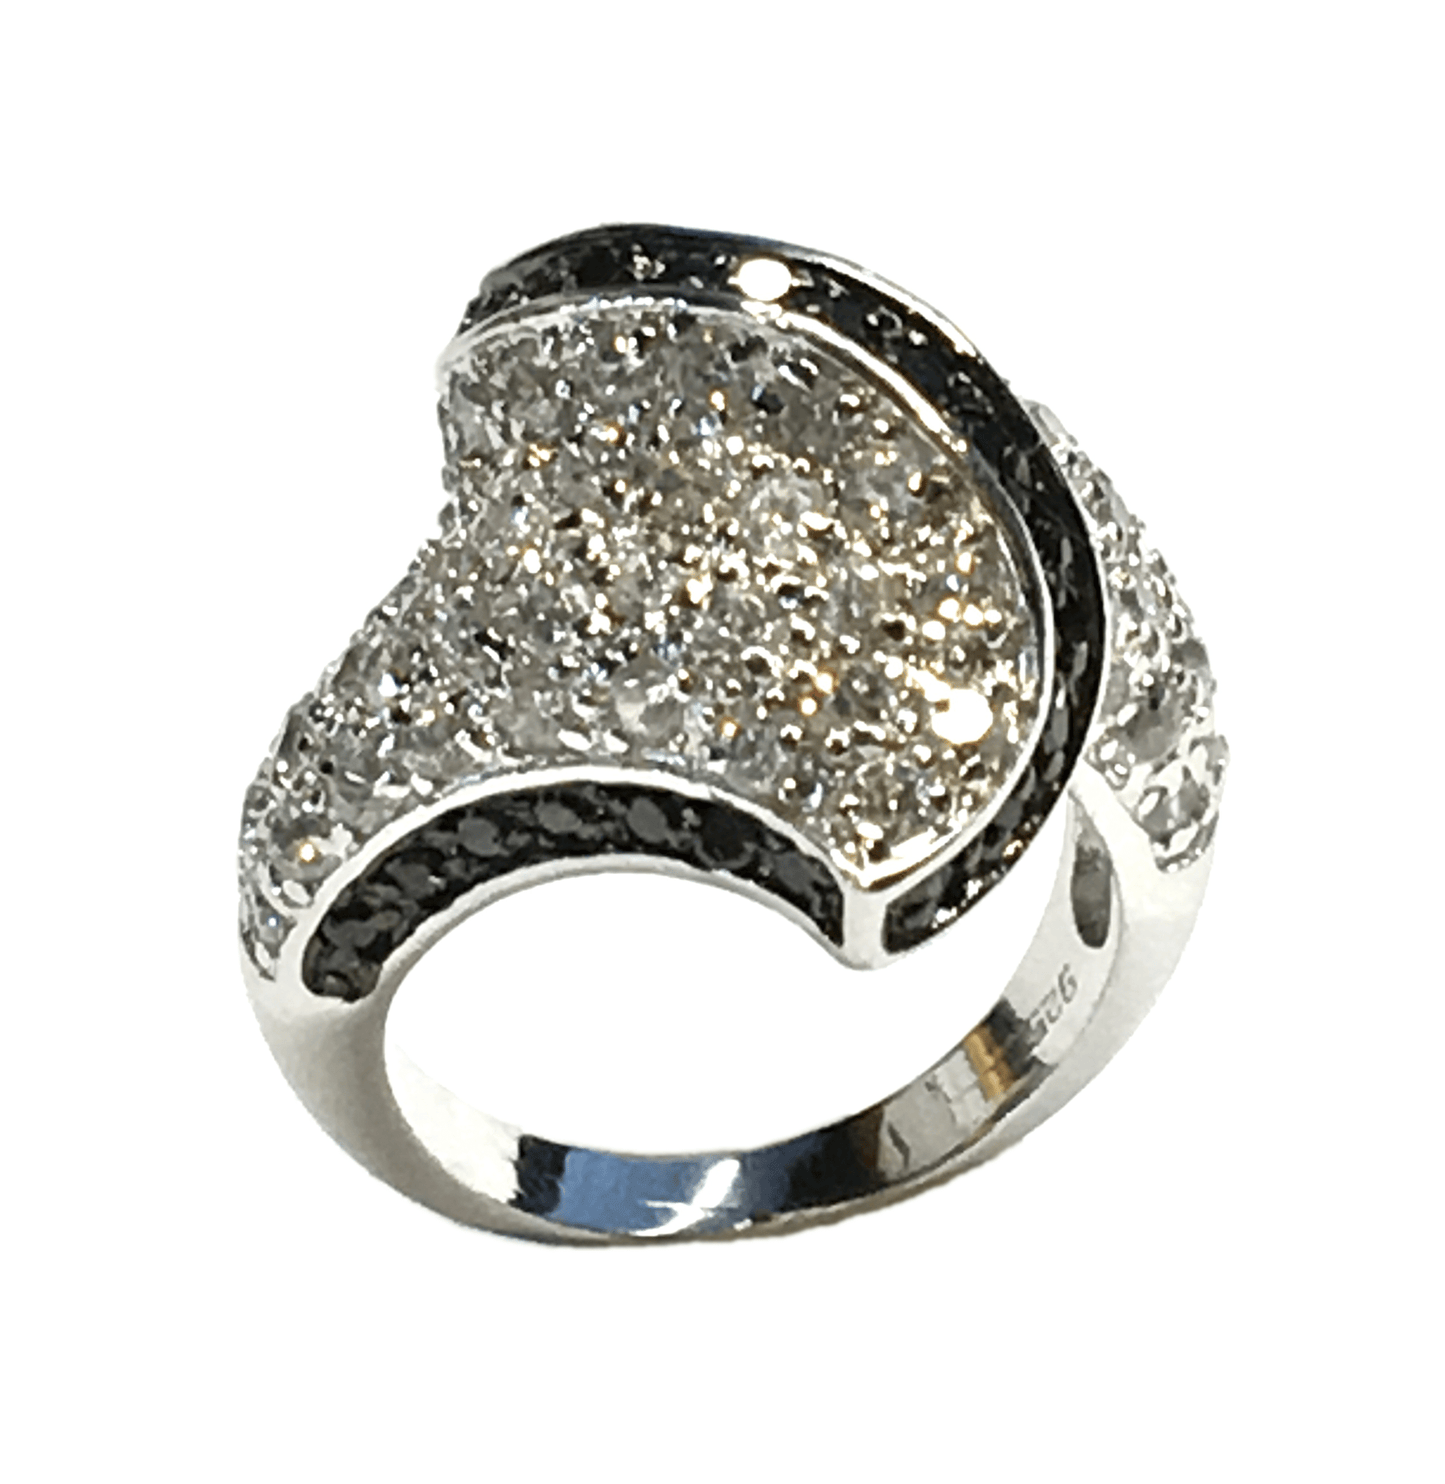 Jewelry - Womens Sterling Silver Contoured Shimmery Black White Wavy Statement Ring Blingschlingers.com